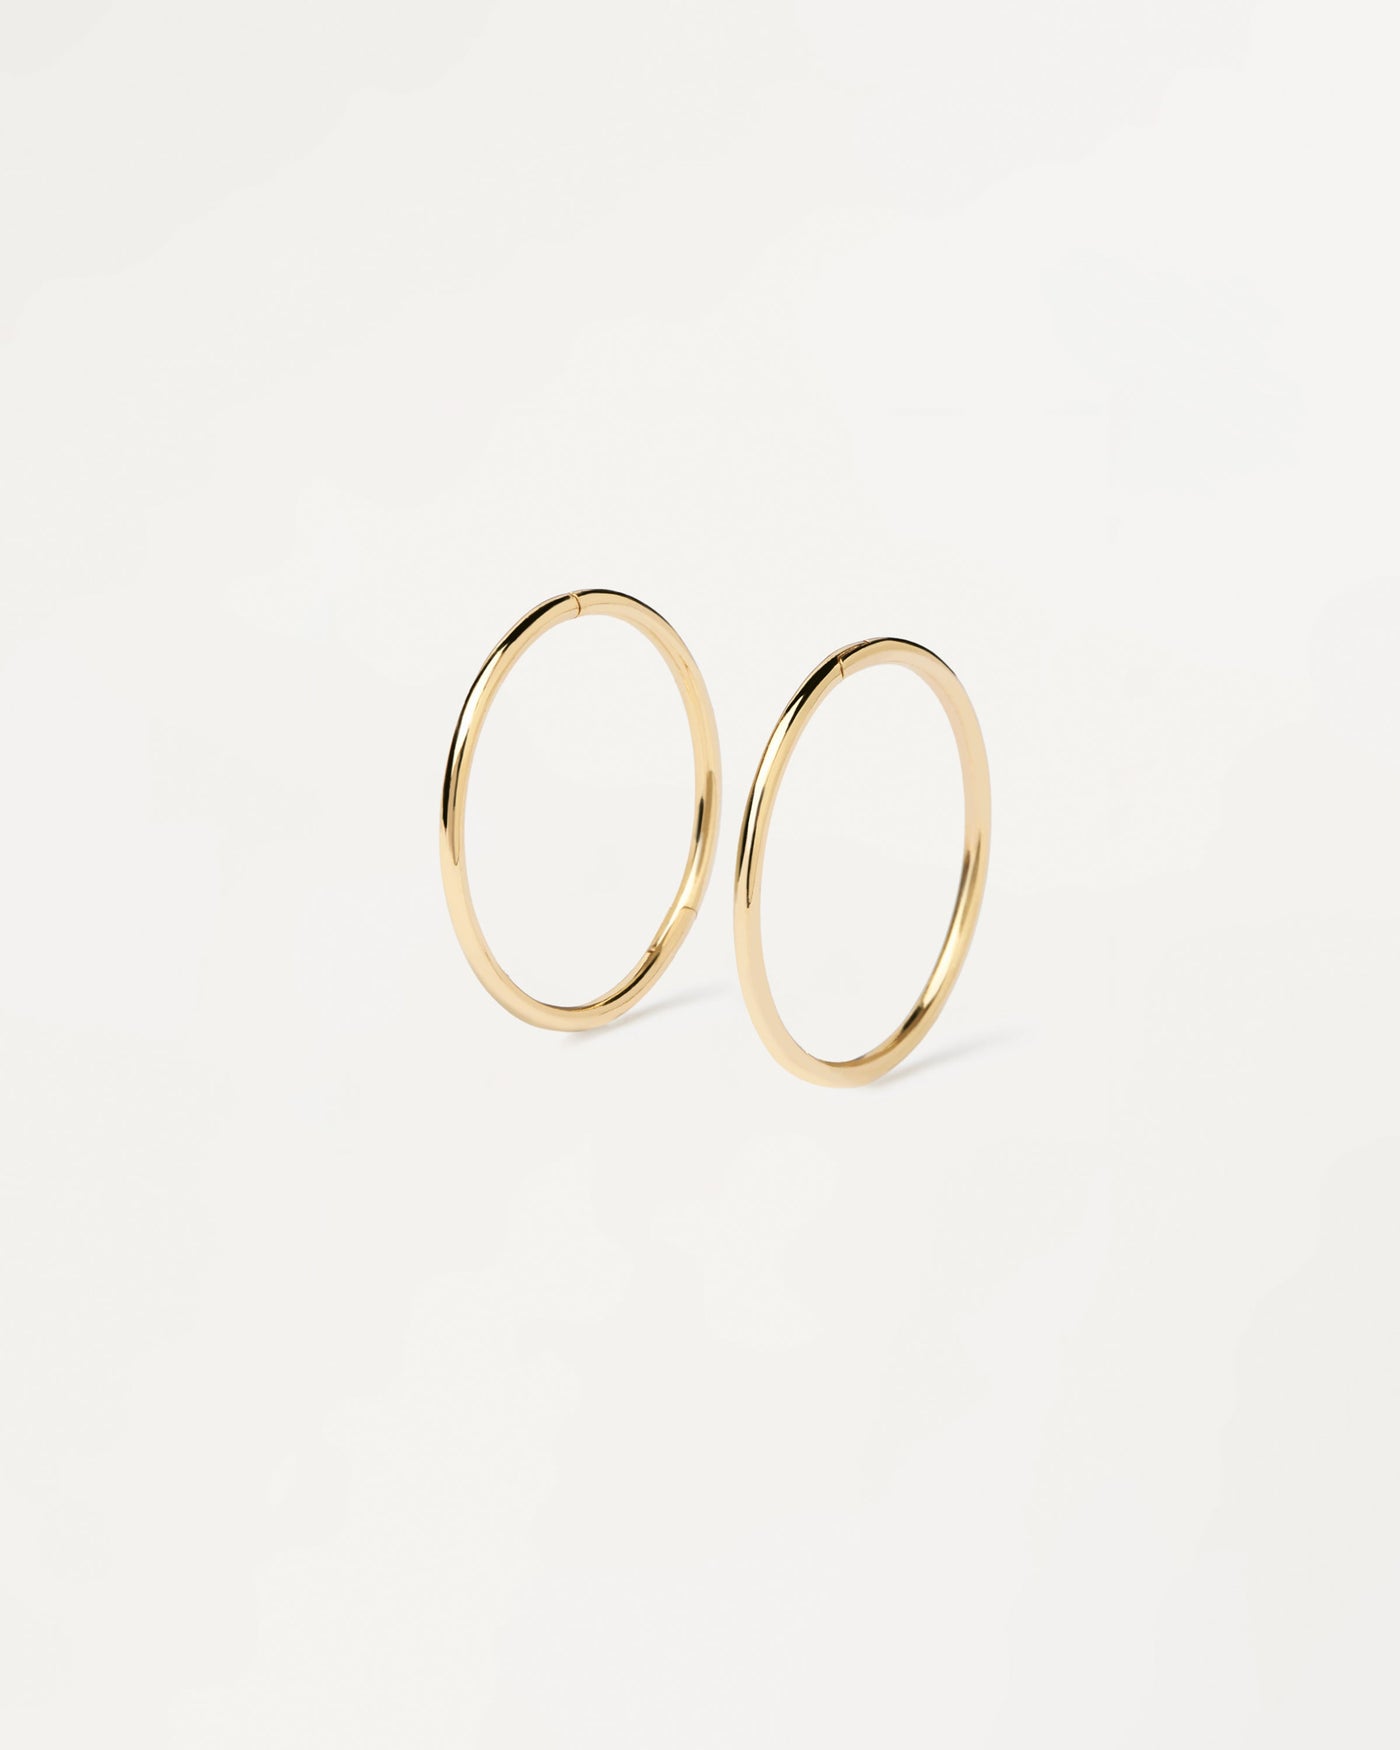 2023 Selection | Gold Essential Mini Hoops. Perfect circle small hoops with plain design, made of recycled yellow gold. Get the latest arrival from PDPAOLA. Place your order safely and get this Best Seller. Free Shipping.